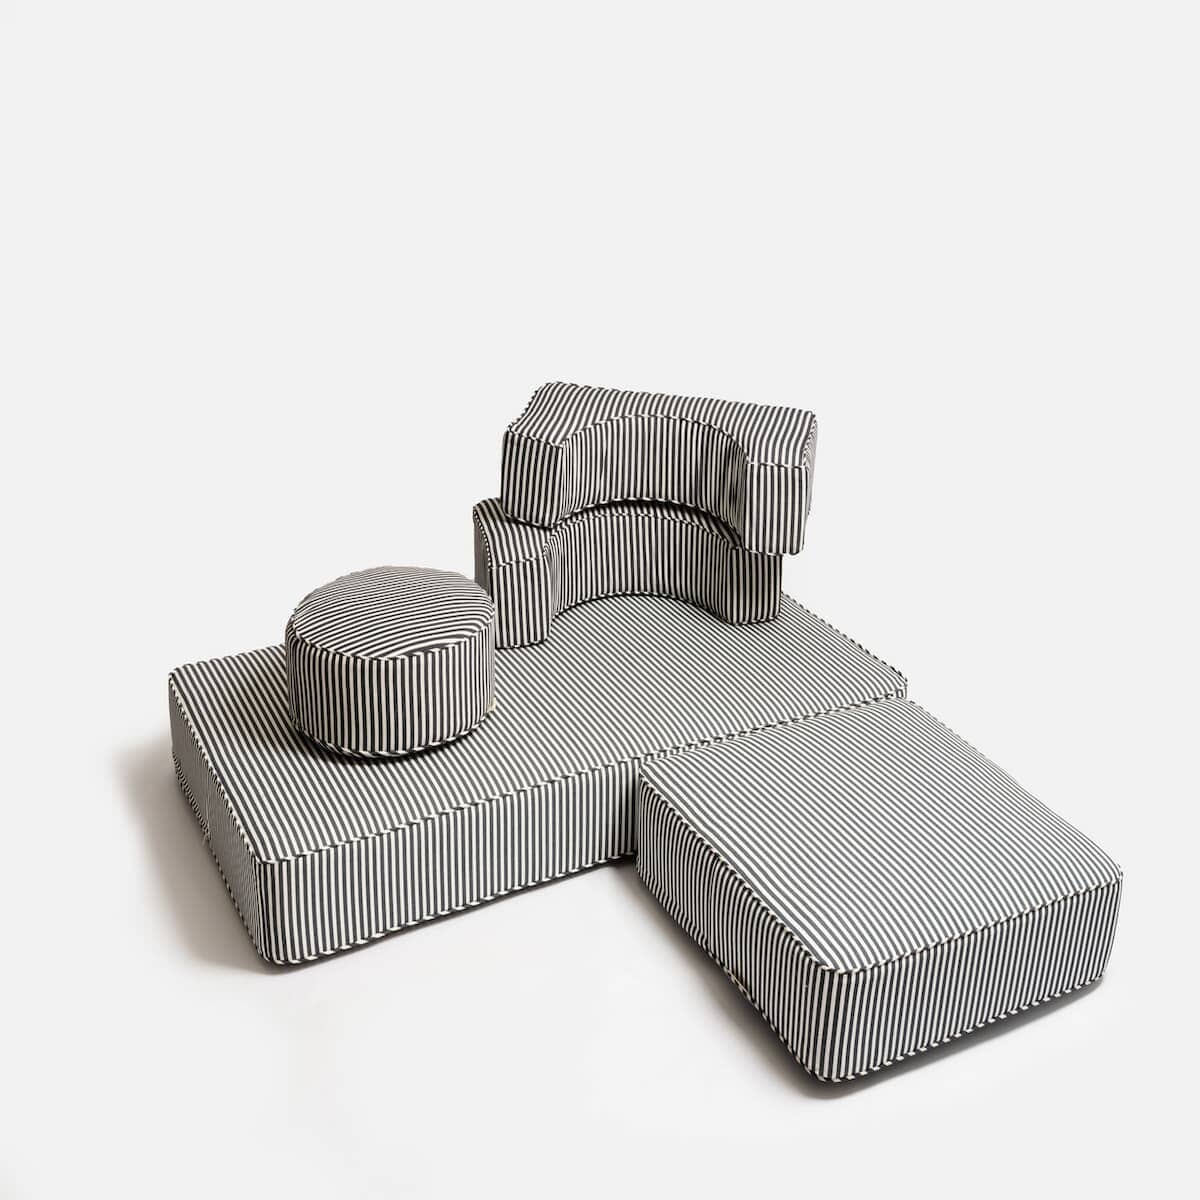 Studio image of the modular pillow stack in a different arrangement